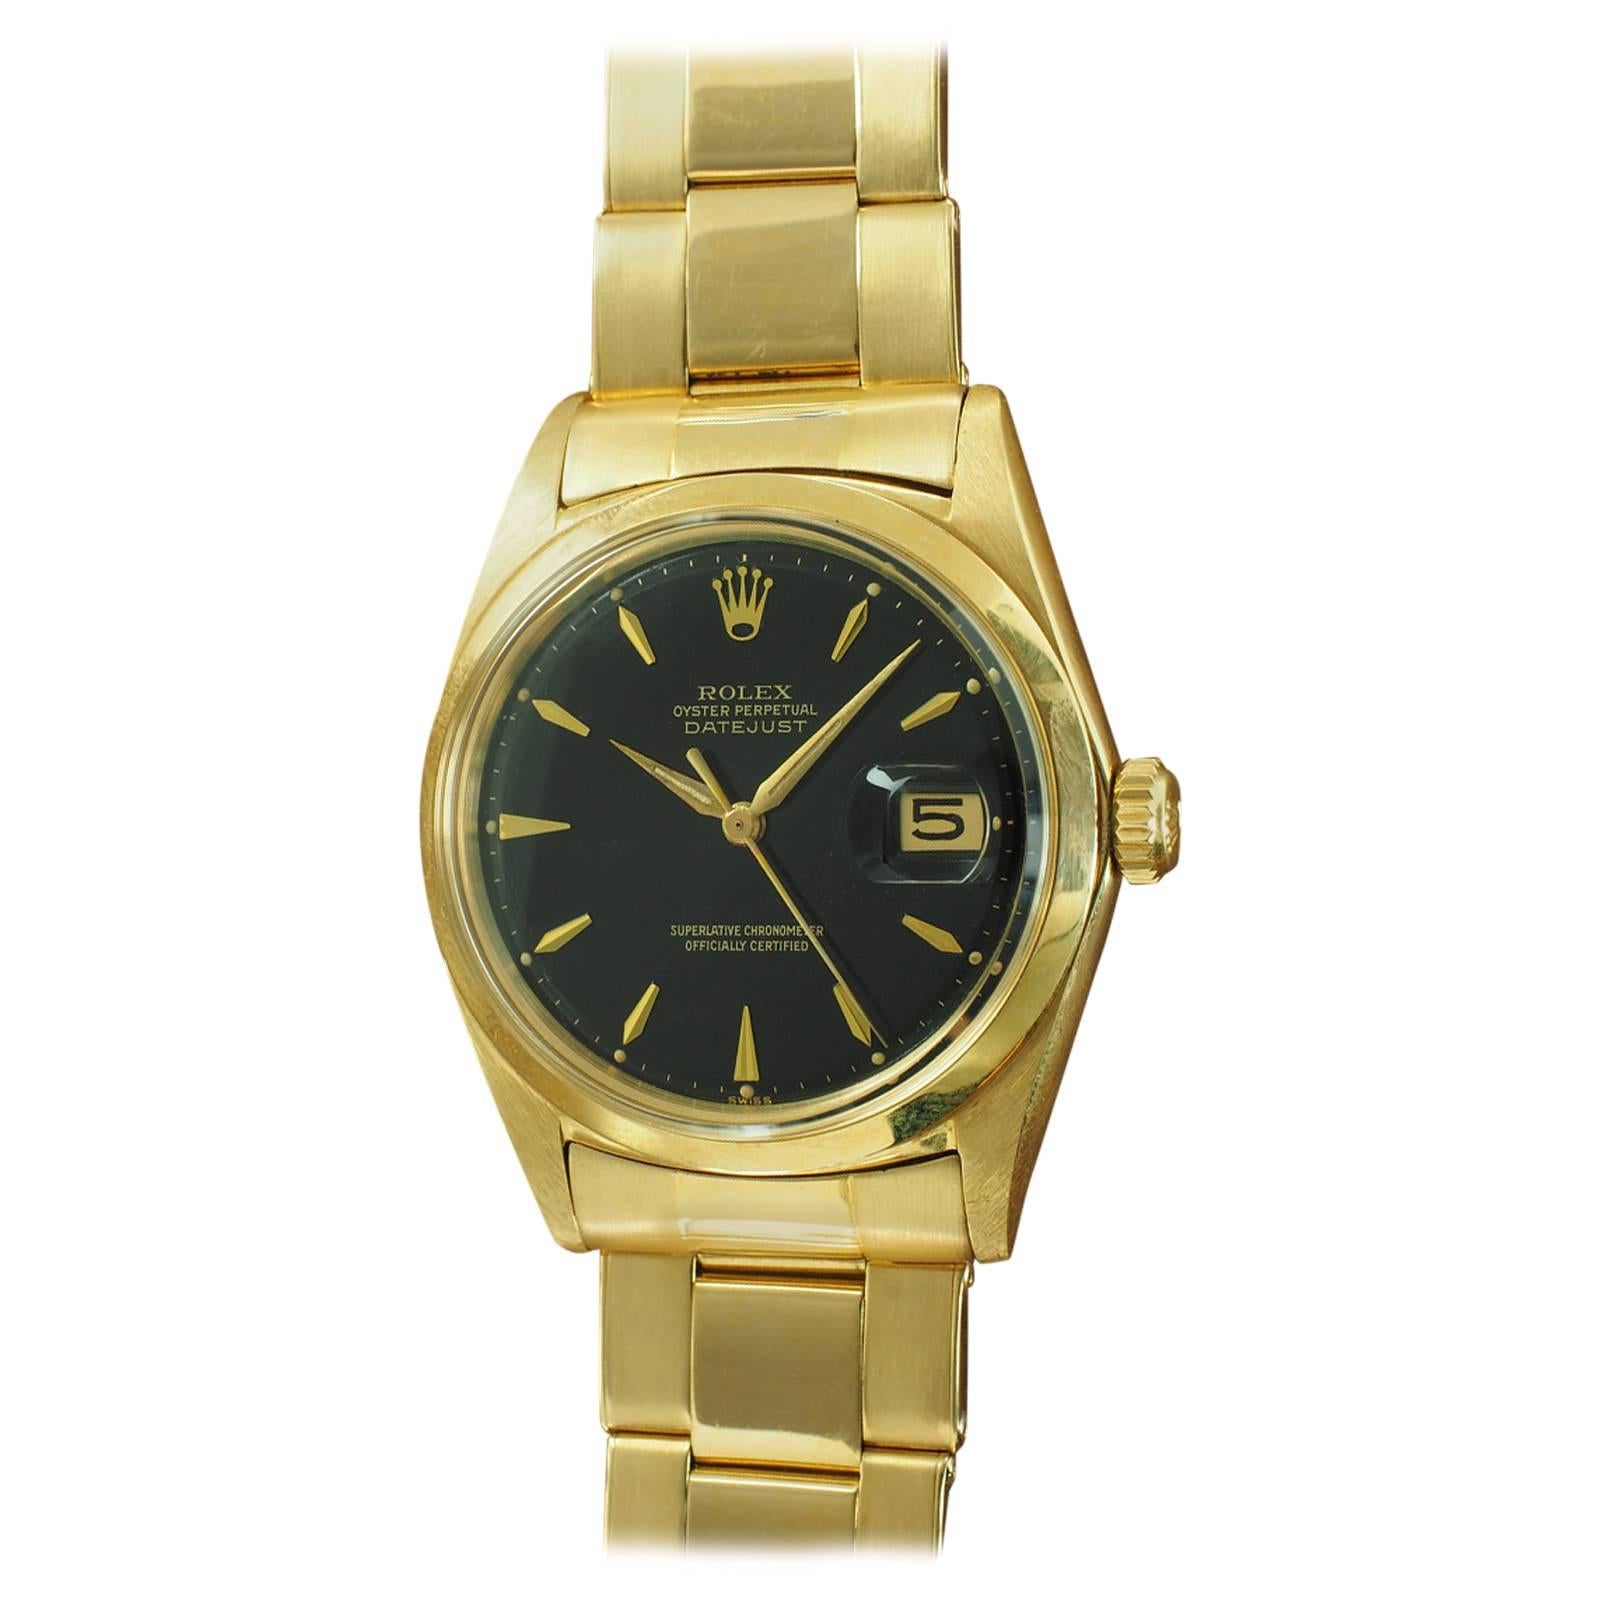 Rolex Yellow Gold Black Dial Datejust Wristwatch Ref 1600 For Sale